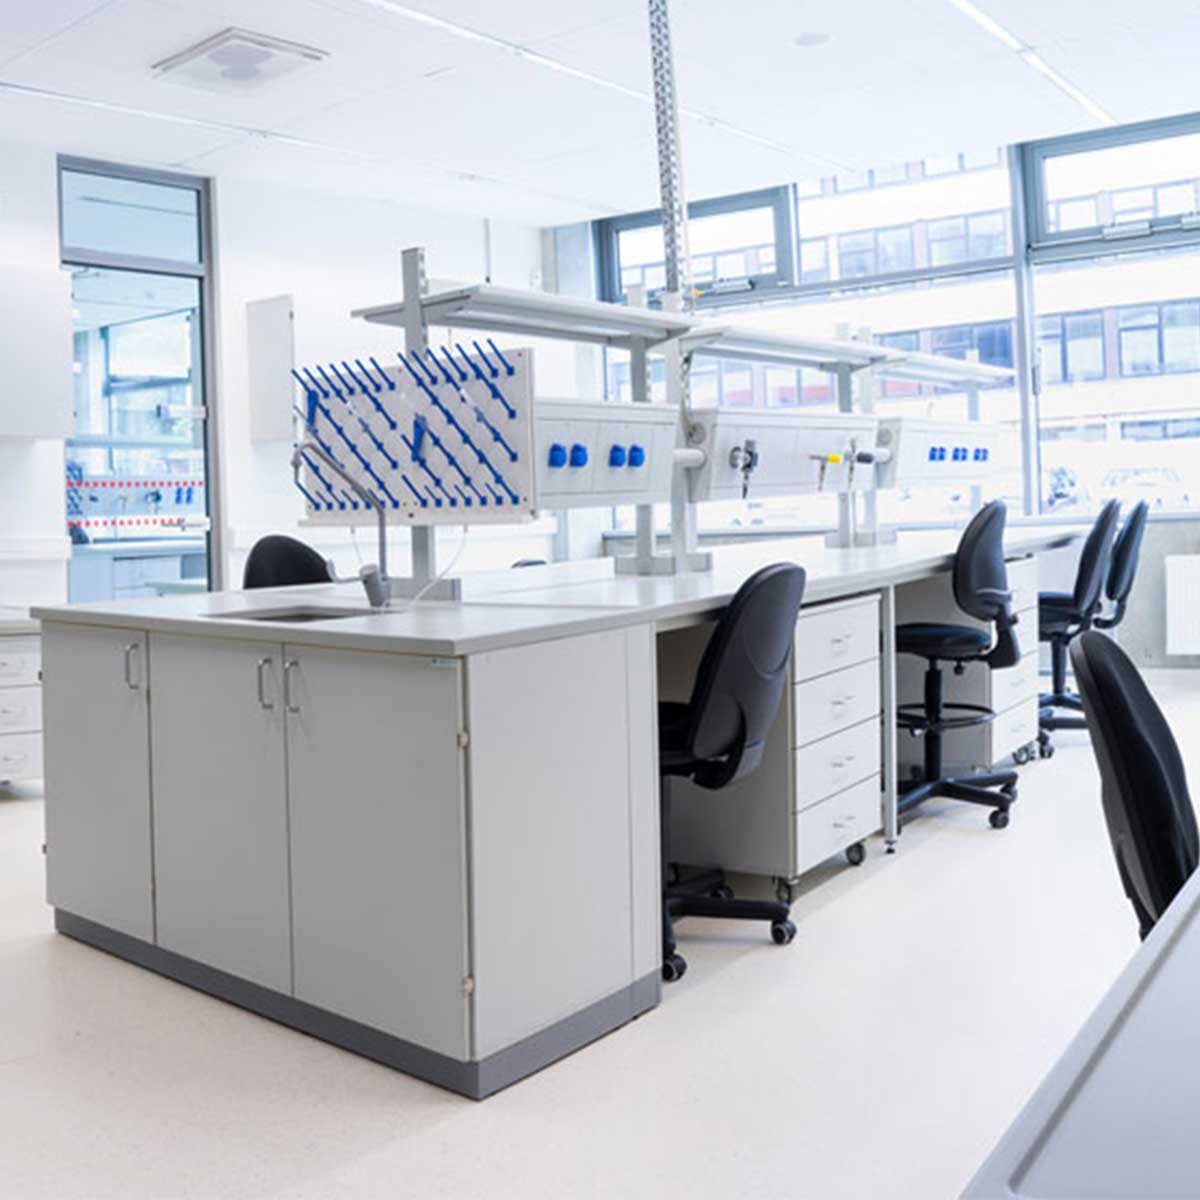 Chemistry Lab Furniture Manufacturers, Suppliers in Dwarka Sector 17